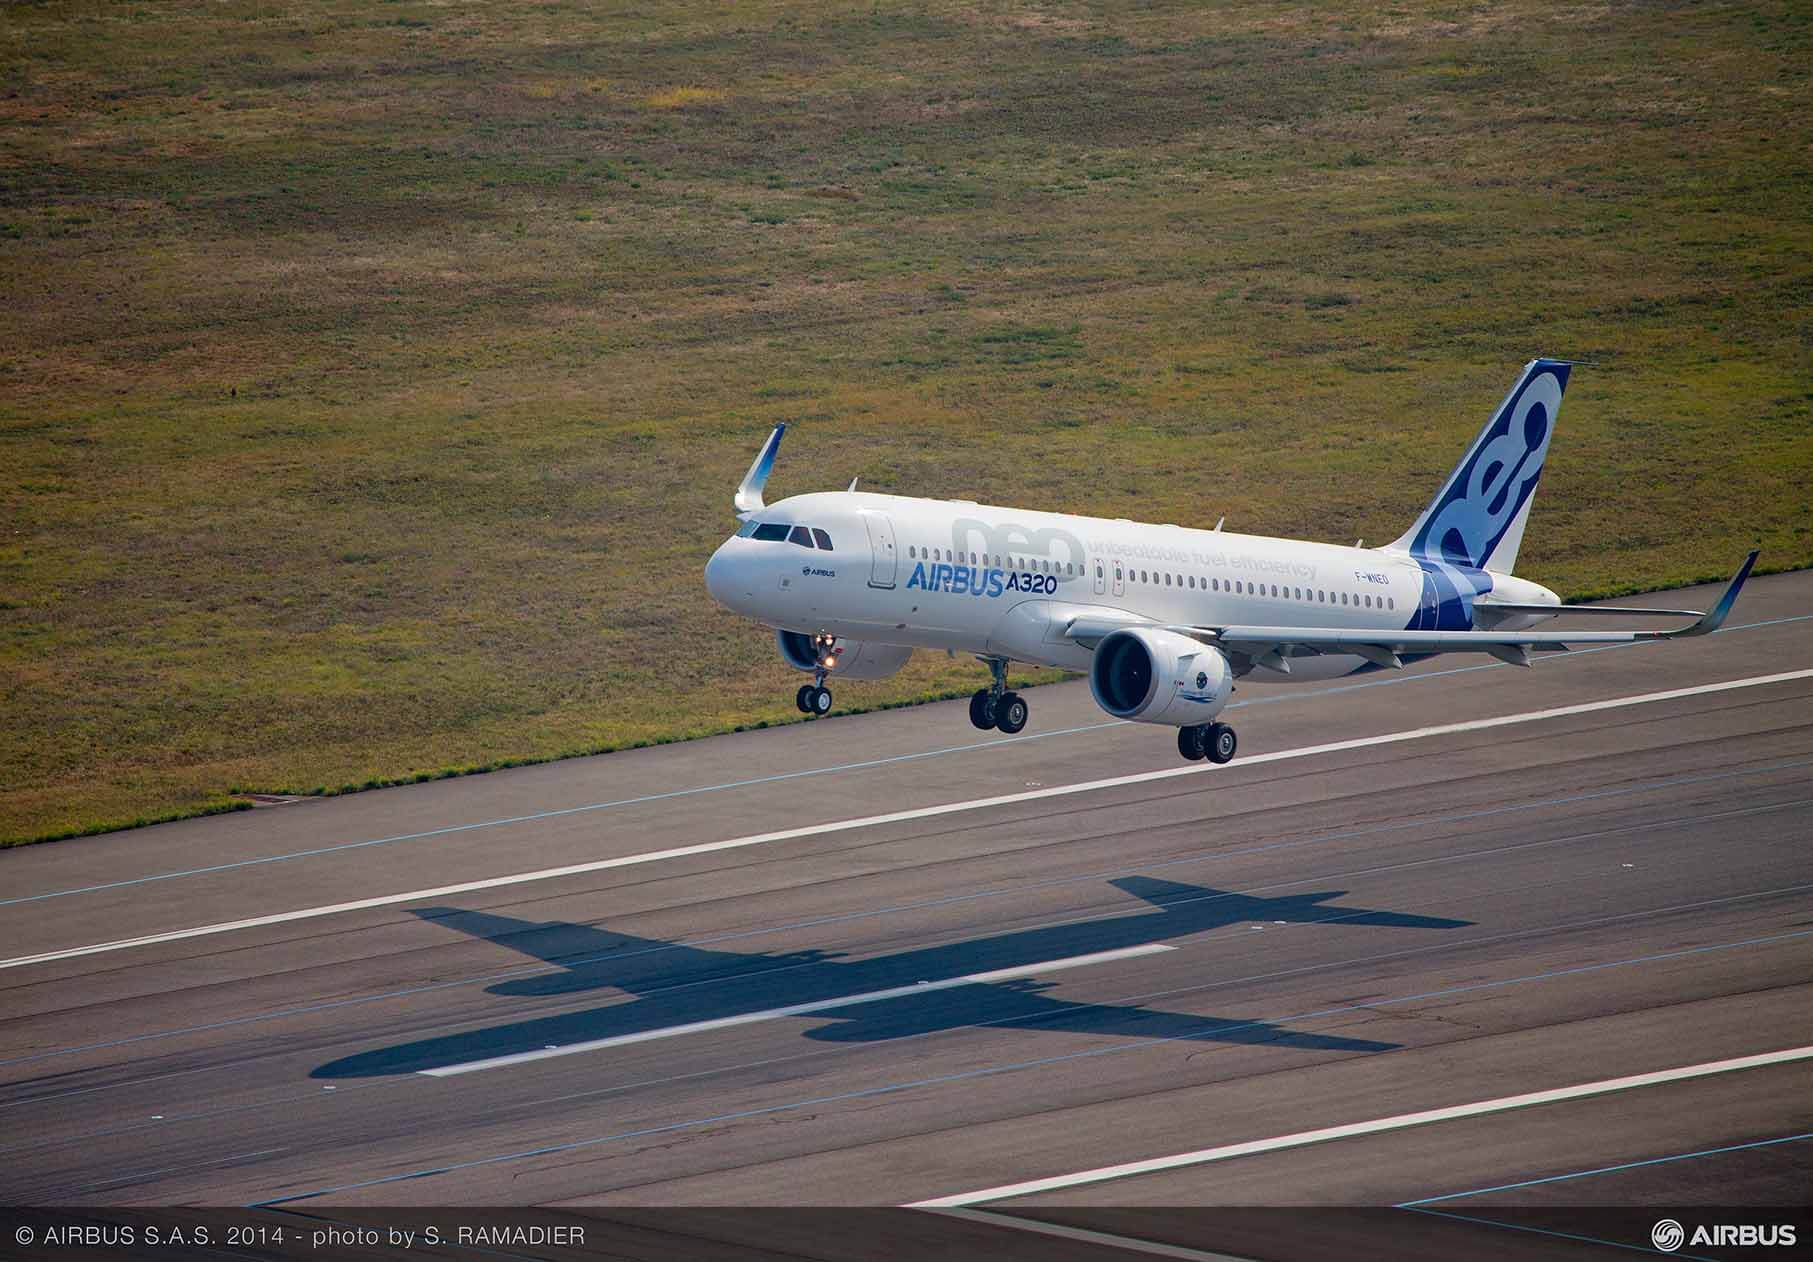 Airbus delivers 55 aircraft to 31 customers in September 2022, with a weighing backlog